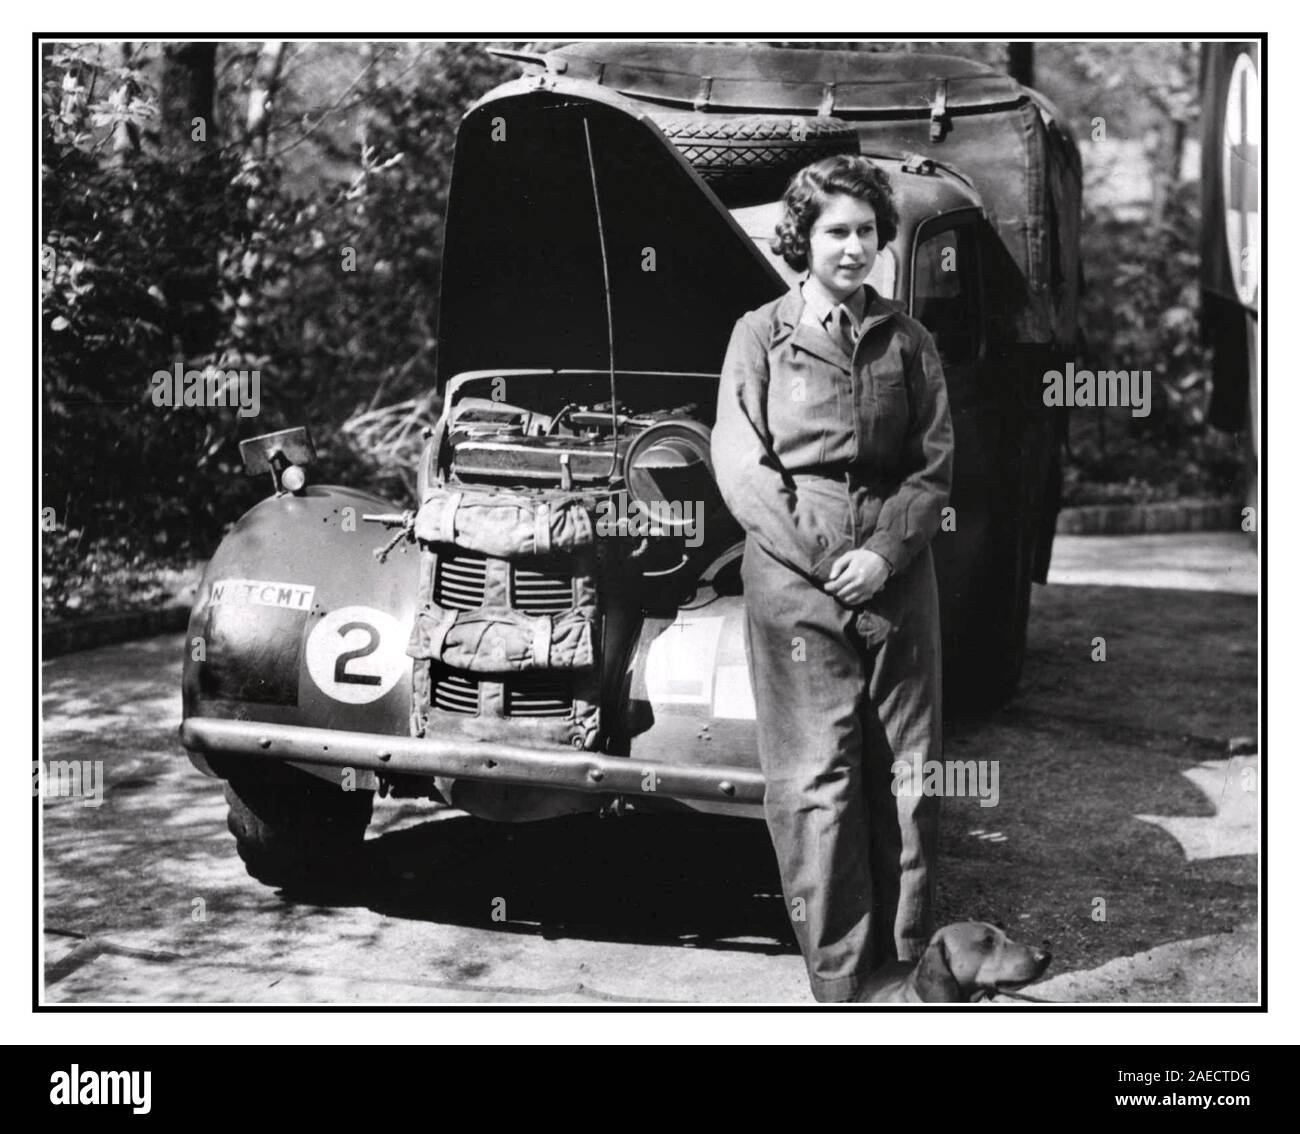 Vintage 1940's Princess Elizabeth (later to be Queen Elizabeth II) stands shyly posing for a photo showing her determination to be a part of the ATS (Auxiliary Territorial Service) training on the repair and maintenance of British World War II military vehicles Princess Elizabeth trained as a driver and mechanic and was given the rank of honorary junior commander Stock Photo